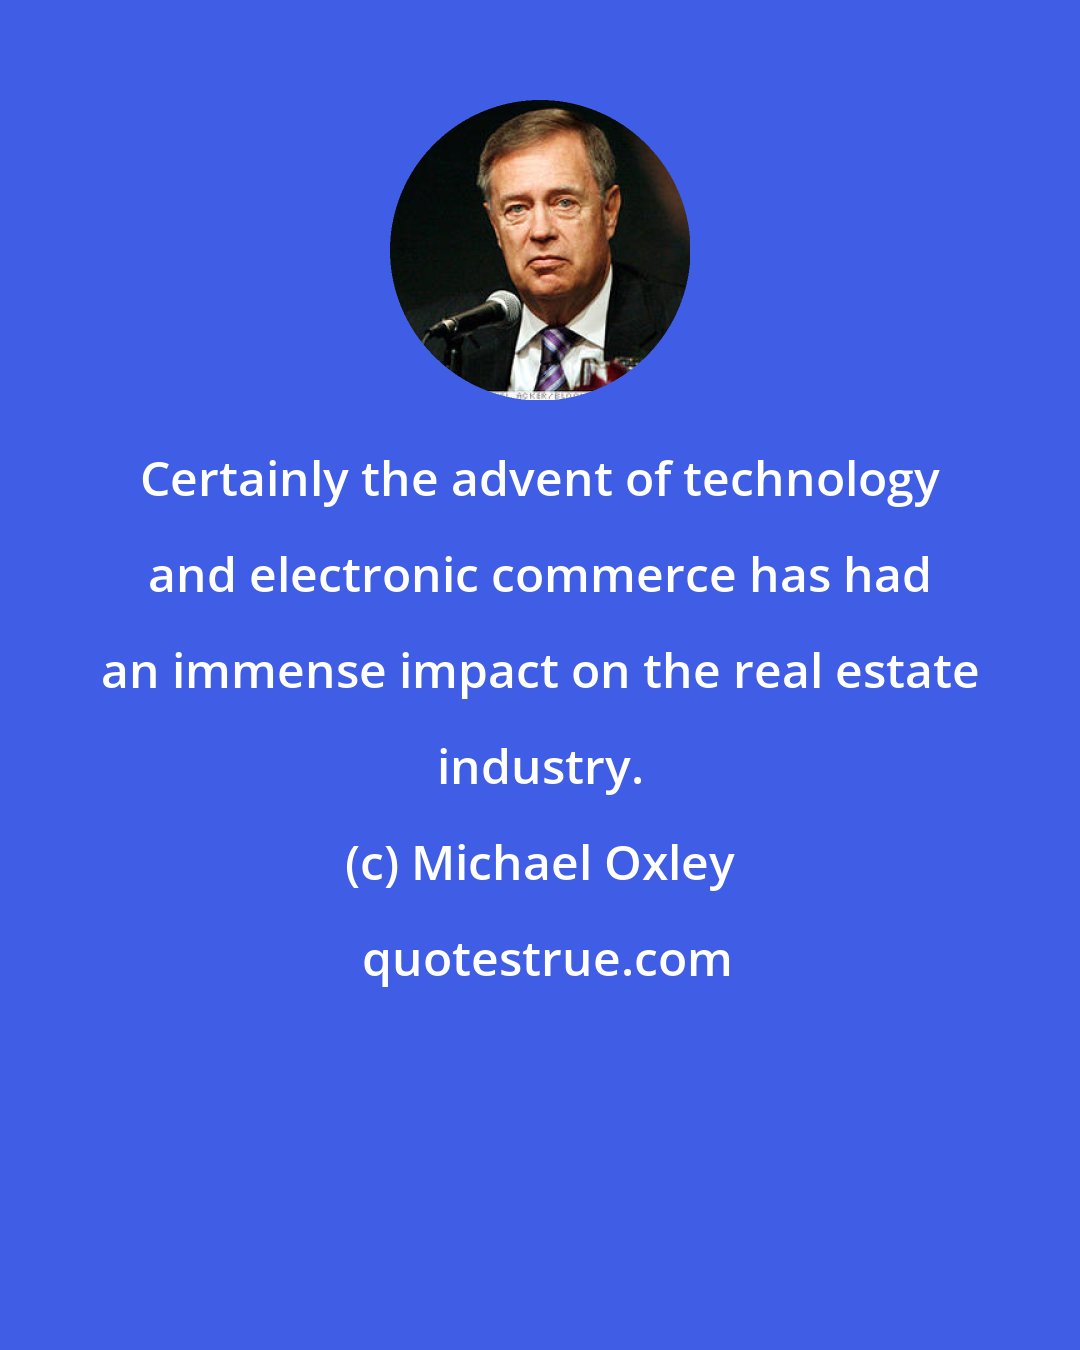 Michael Oxley: Certainly the advent of technology and electronic commerce has had an immense impact on the real estate industry.